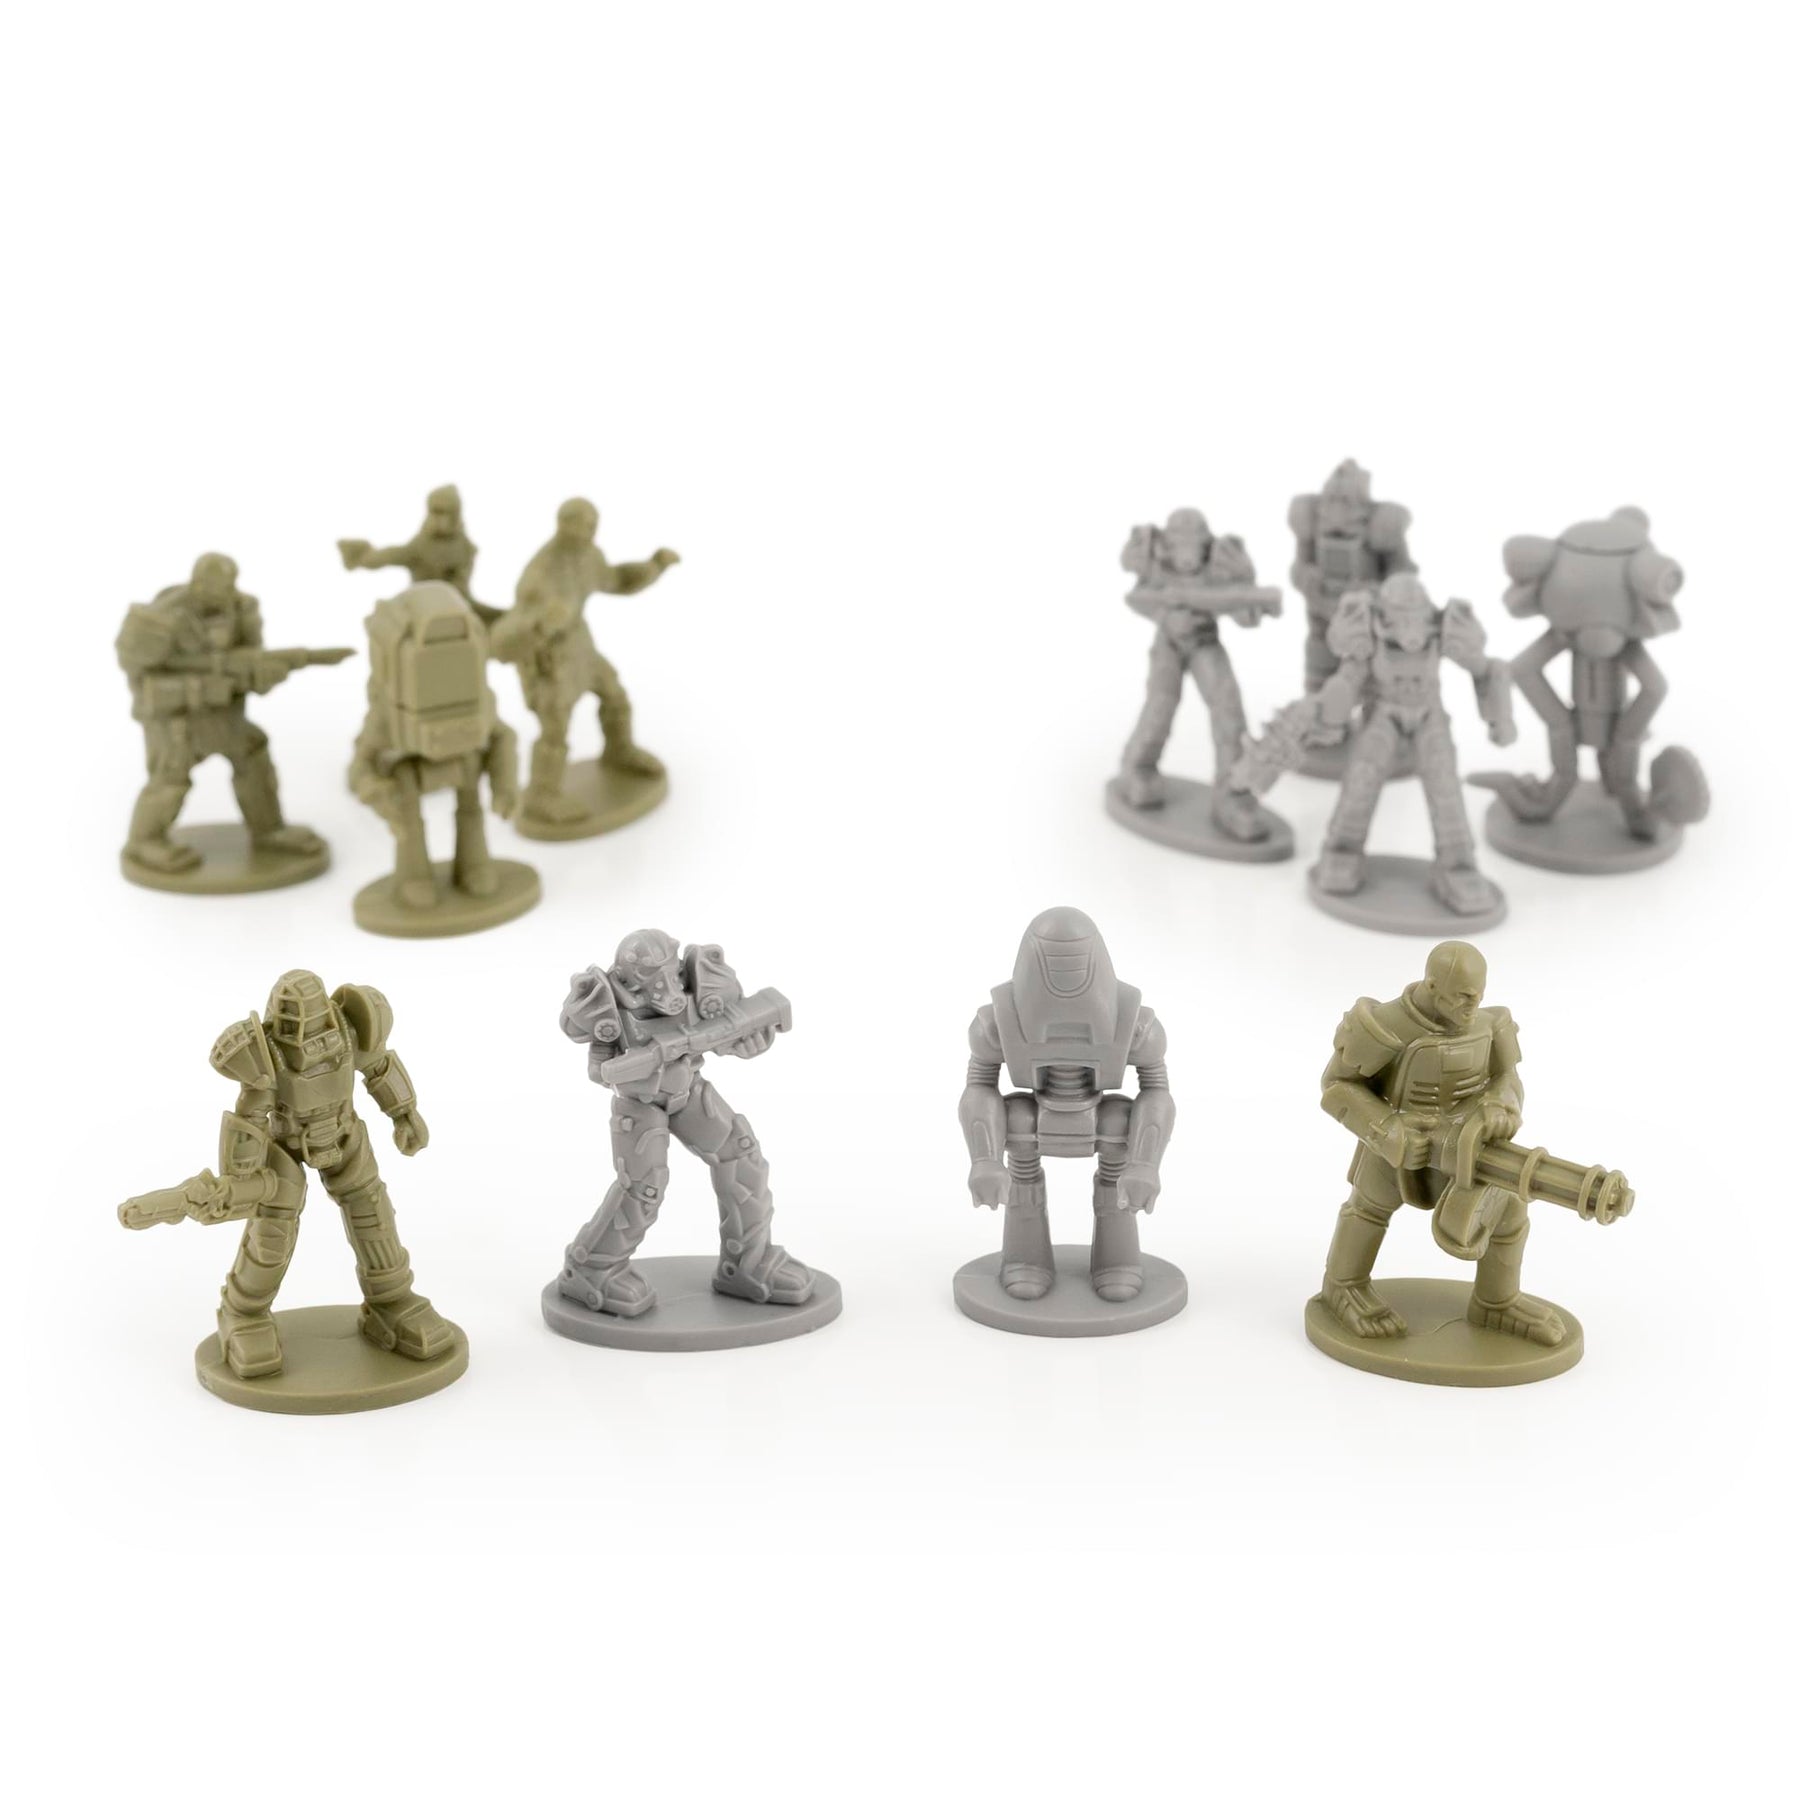 Fallout Nanoforce Series 1 Army Builder Figure Collection - Bagged Version 3